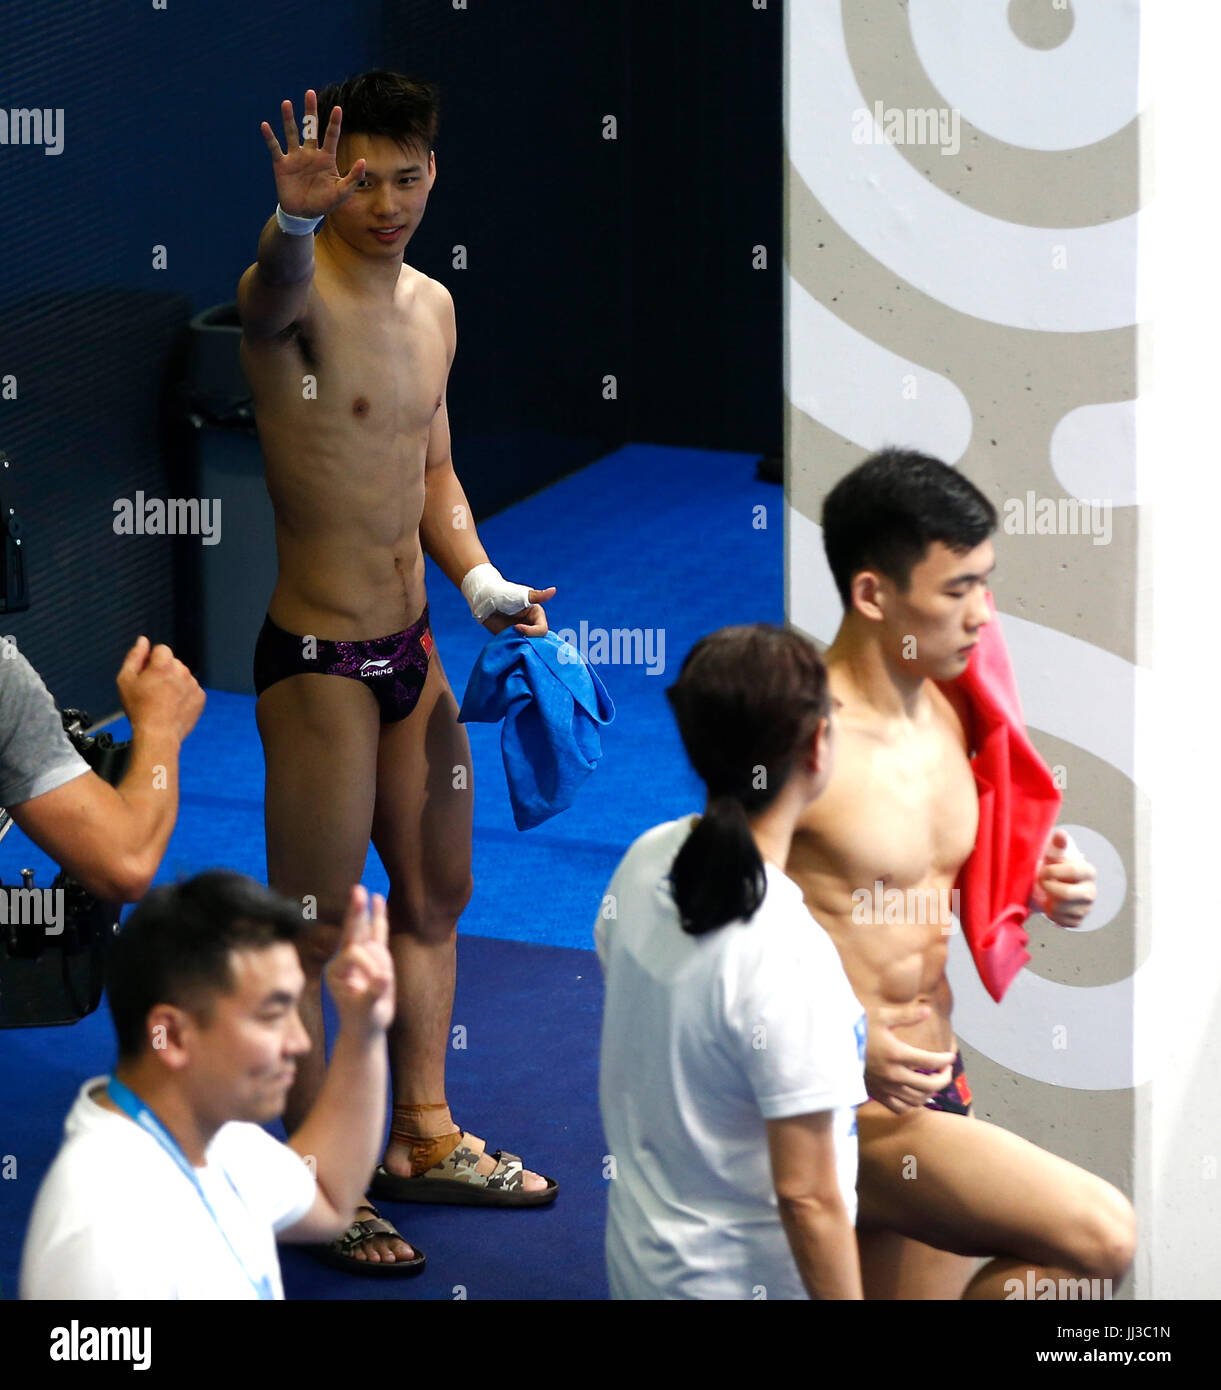 Budapest, Hungary. 17th July, 2017. China's Chen Aisen (top) reacts during the men's 10m platform synchronised final of Diving at the 17th FINA World Championships at Duna Arena in Budapest, Hungary, on July 17, 2017. The Chinese pair won the gold medals with 498.48 points. Credit: Ding Xu/Xinhua/Alamy Live News Stock Photo